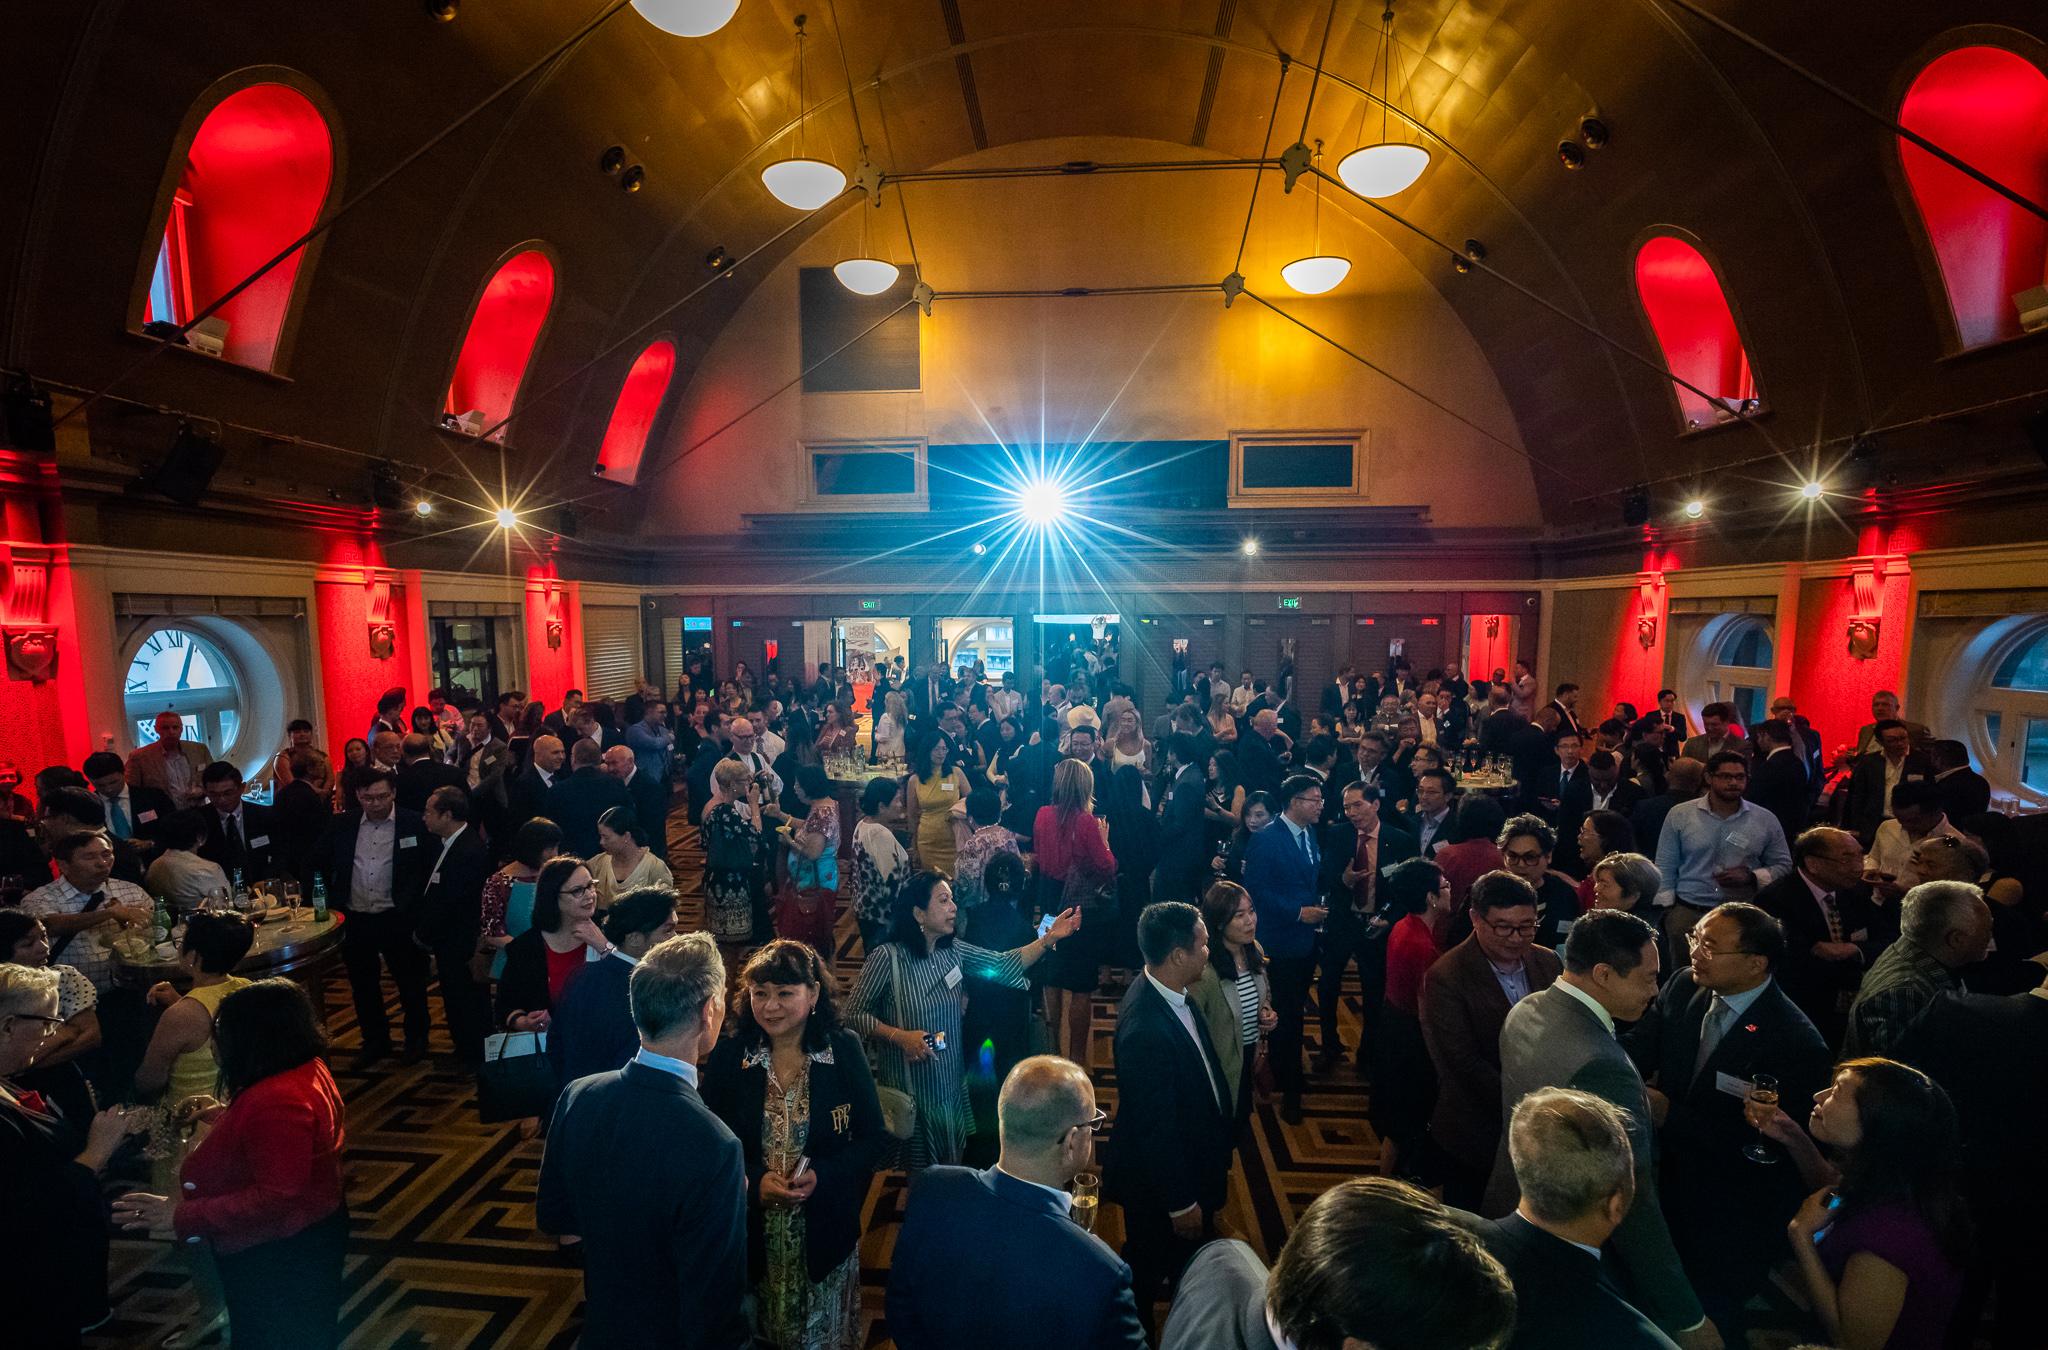 The Hong Kong Economic and Trade Office, Sydney hosted a reception in Sydney, Australia, today (February 7) to celebrate the Year of the Rabbit. Over 300 guests from various sectors including political and business circles, media, academic and community groups as well as government representatives attended the reception.